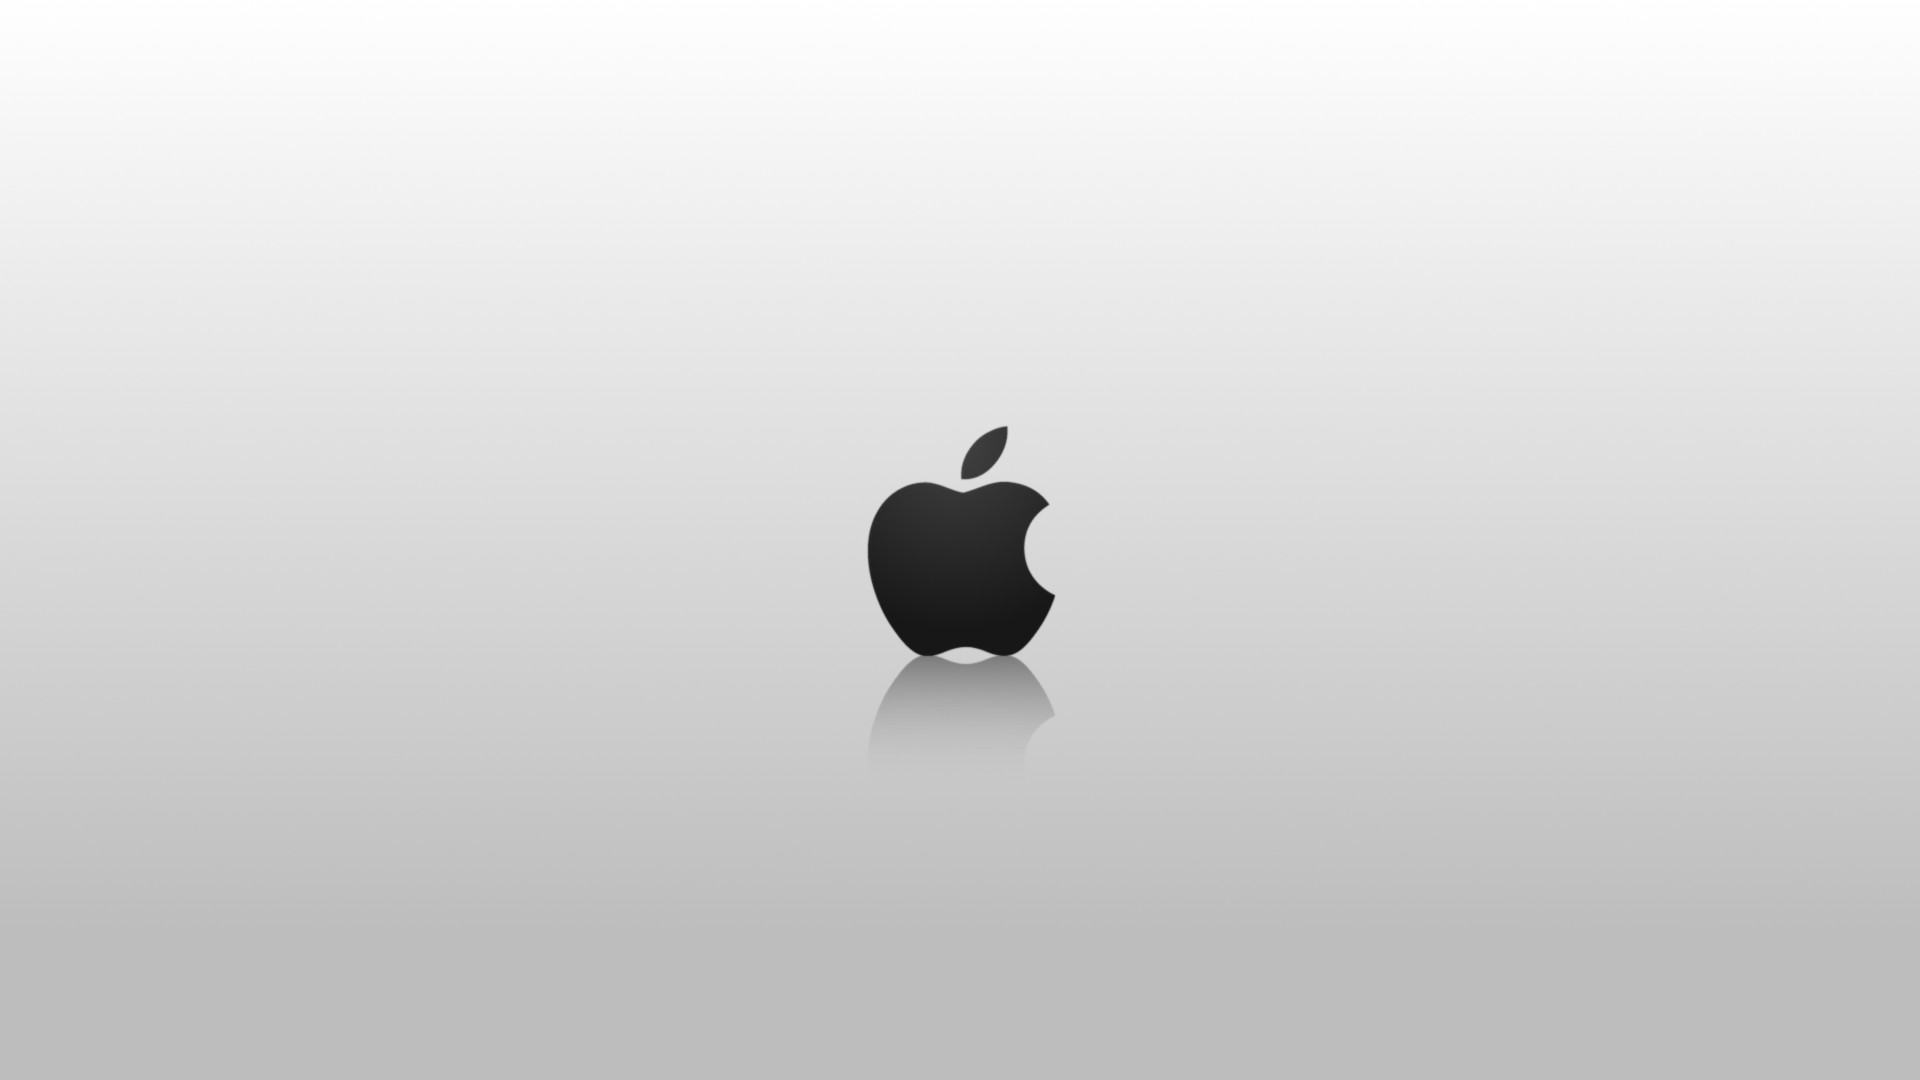 36+ Apple wallpapers ·① Download free cool HD backgrounds ...